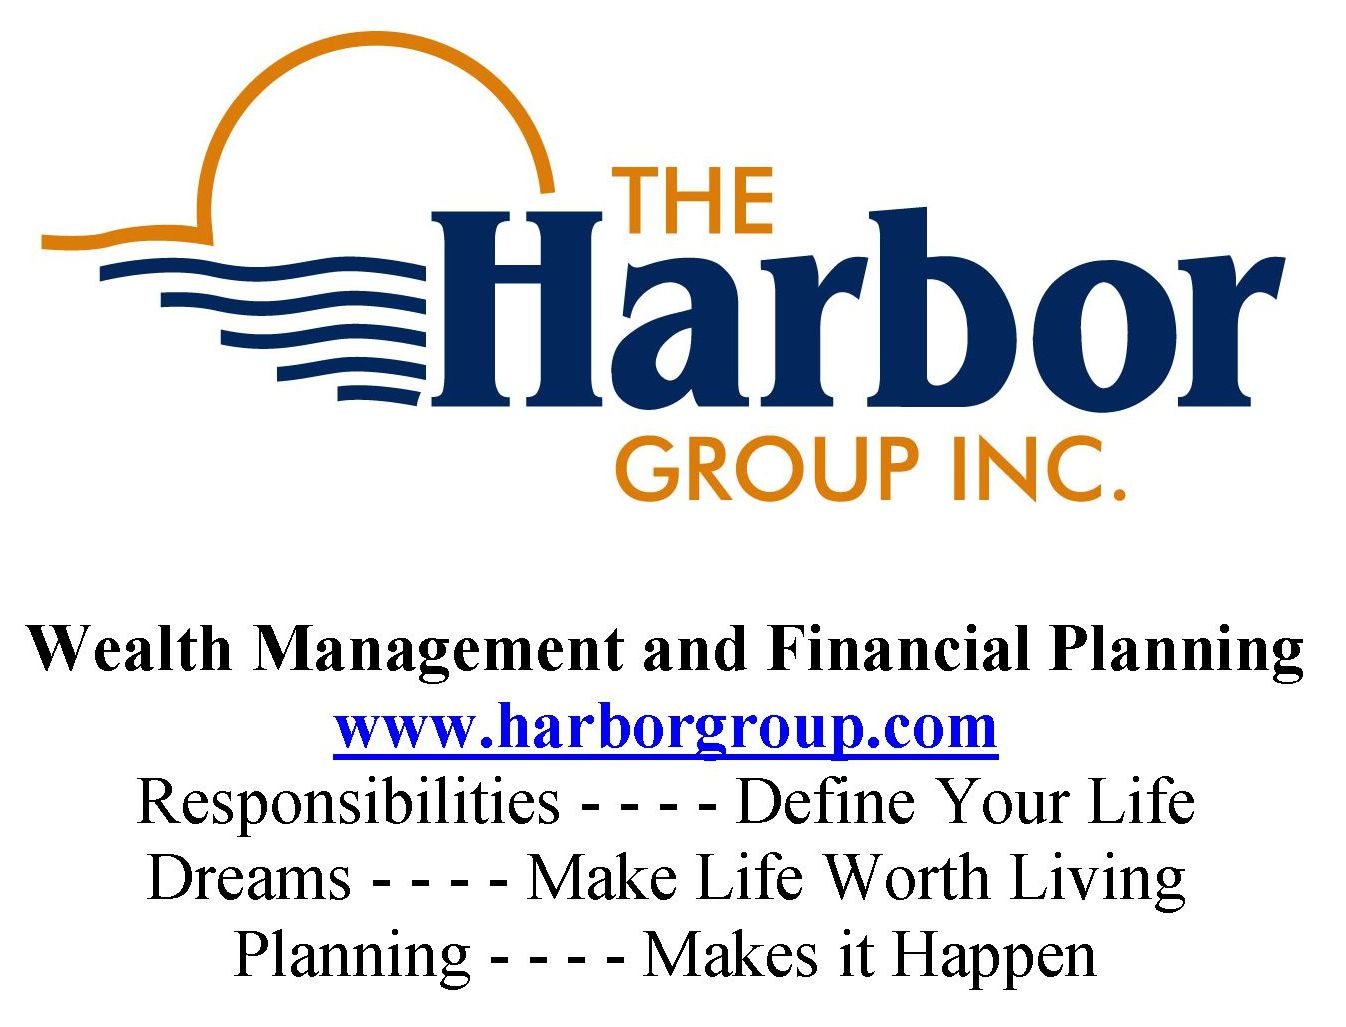 The Harbor Group